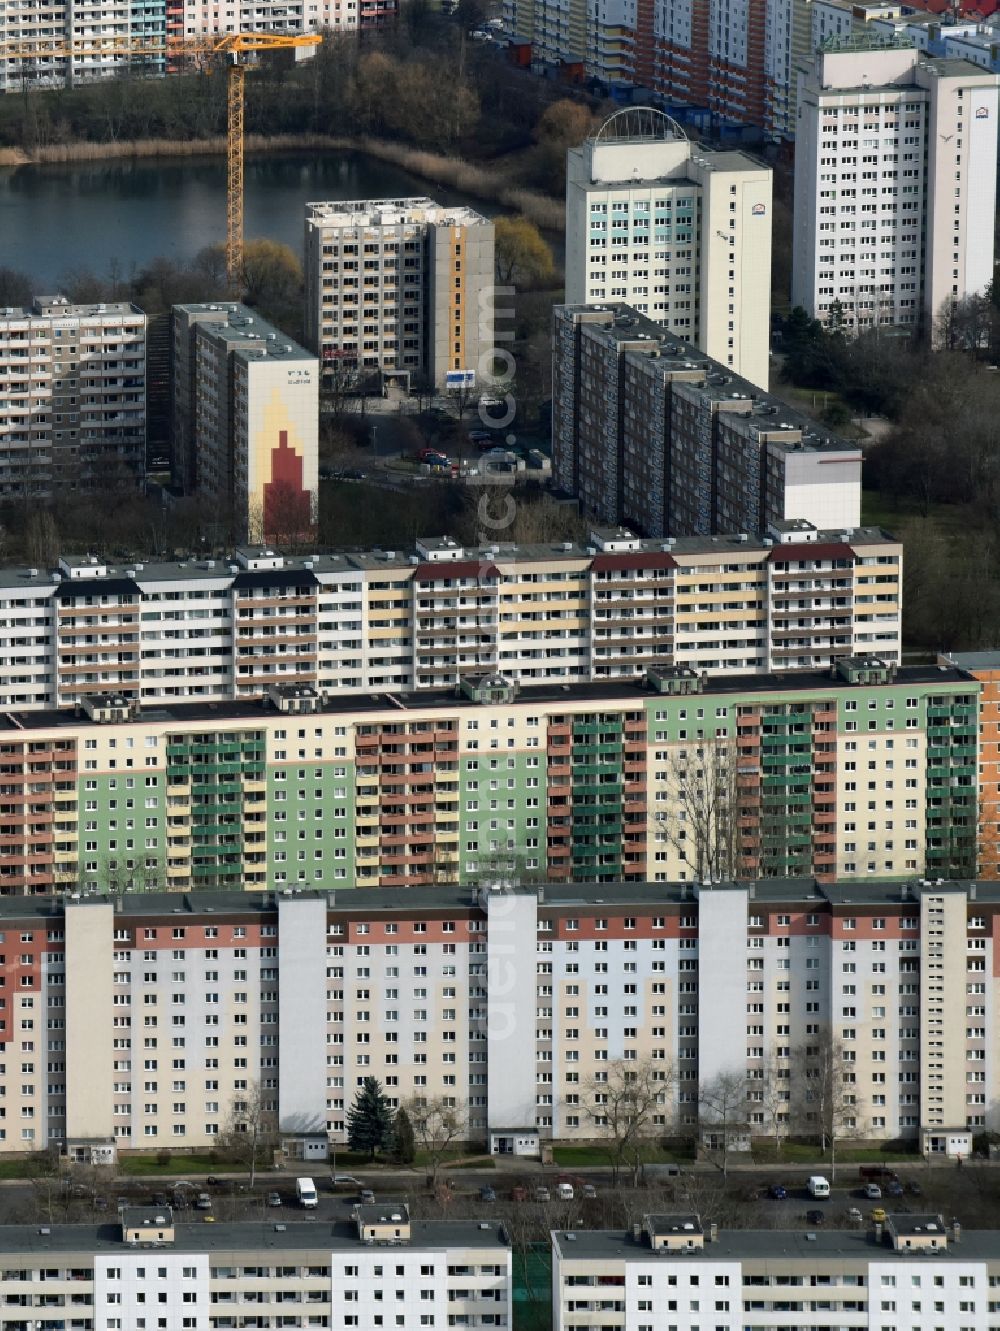 Aerial image Magdeburg - Skyscrapers in the residential area of industrially manufactured settlement Barleber Strasse in the district Neustaedter See in Magdeburg in the state Saxony-Anhalt